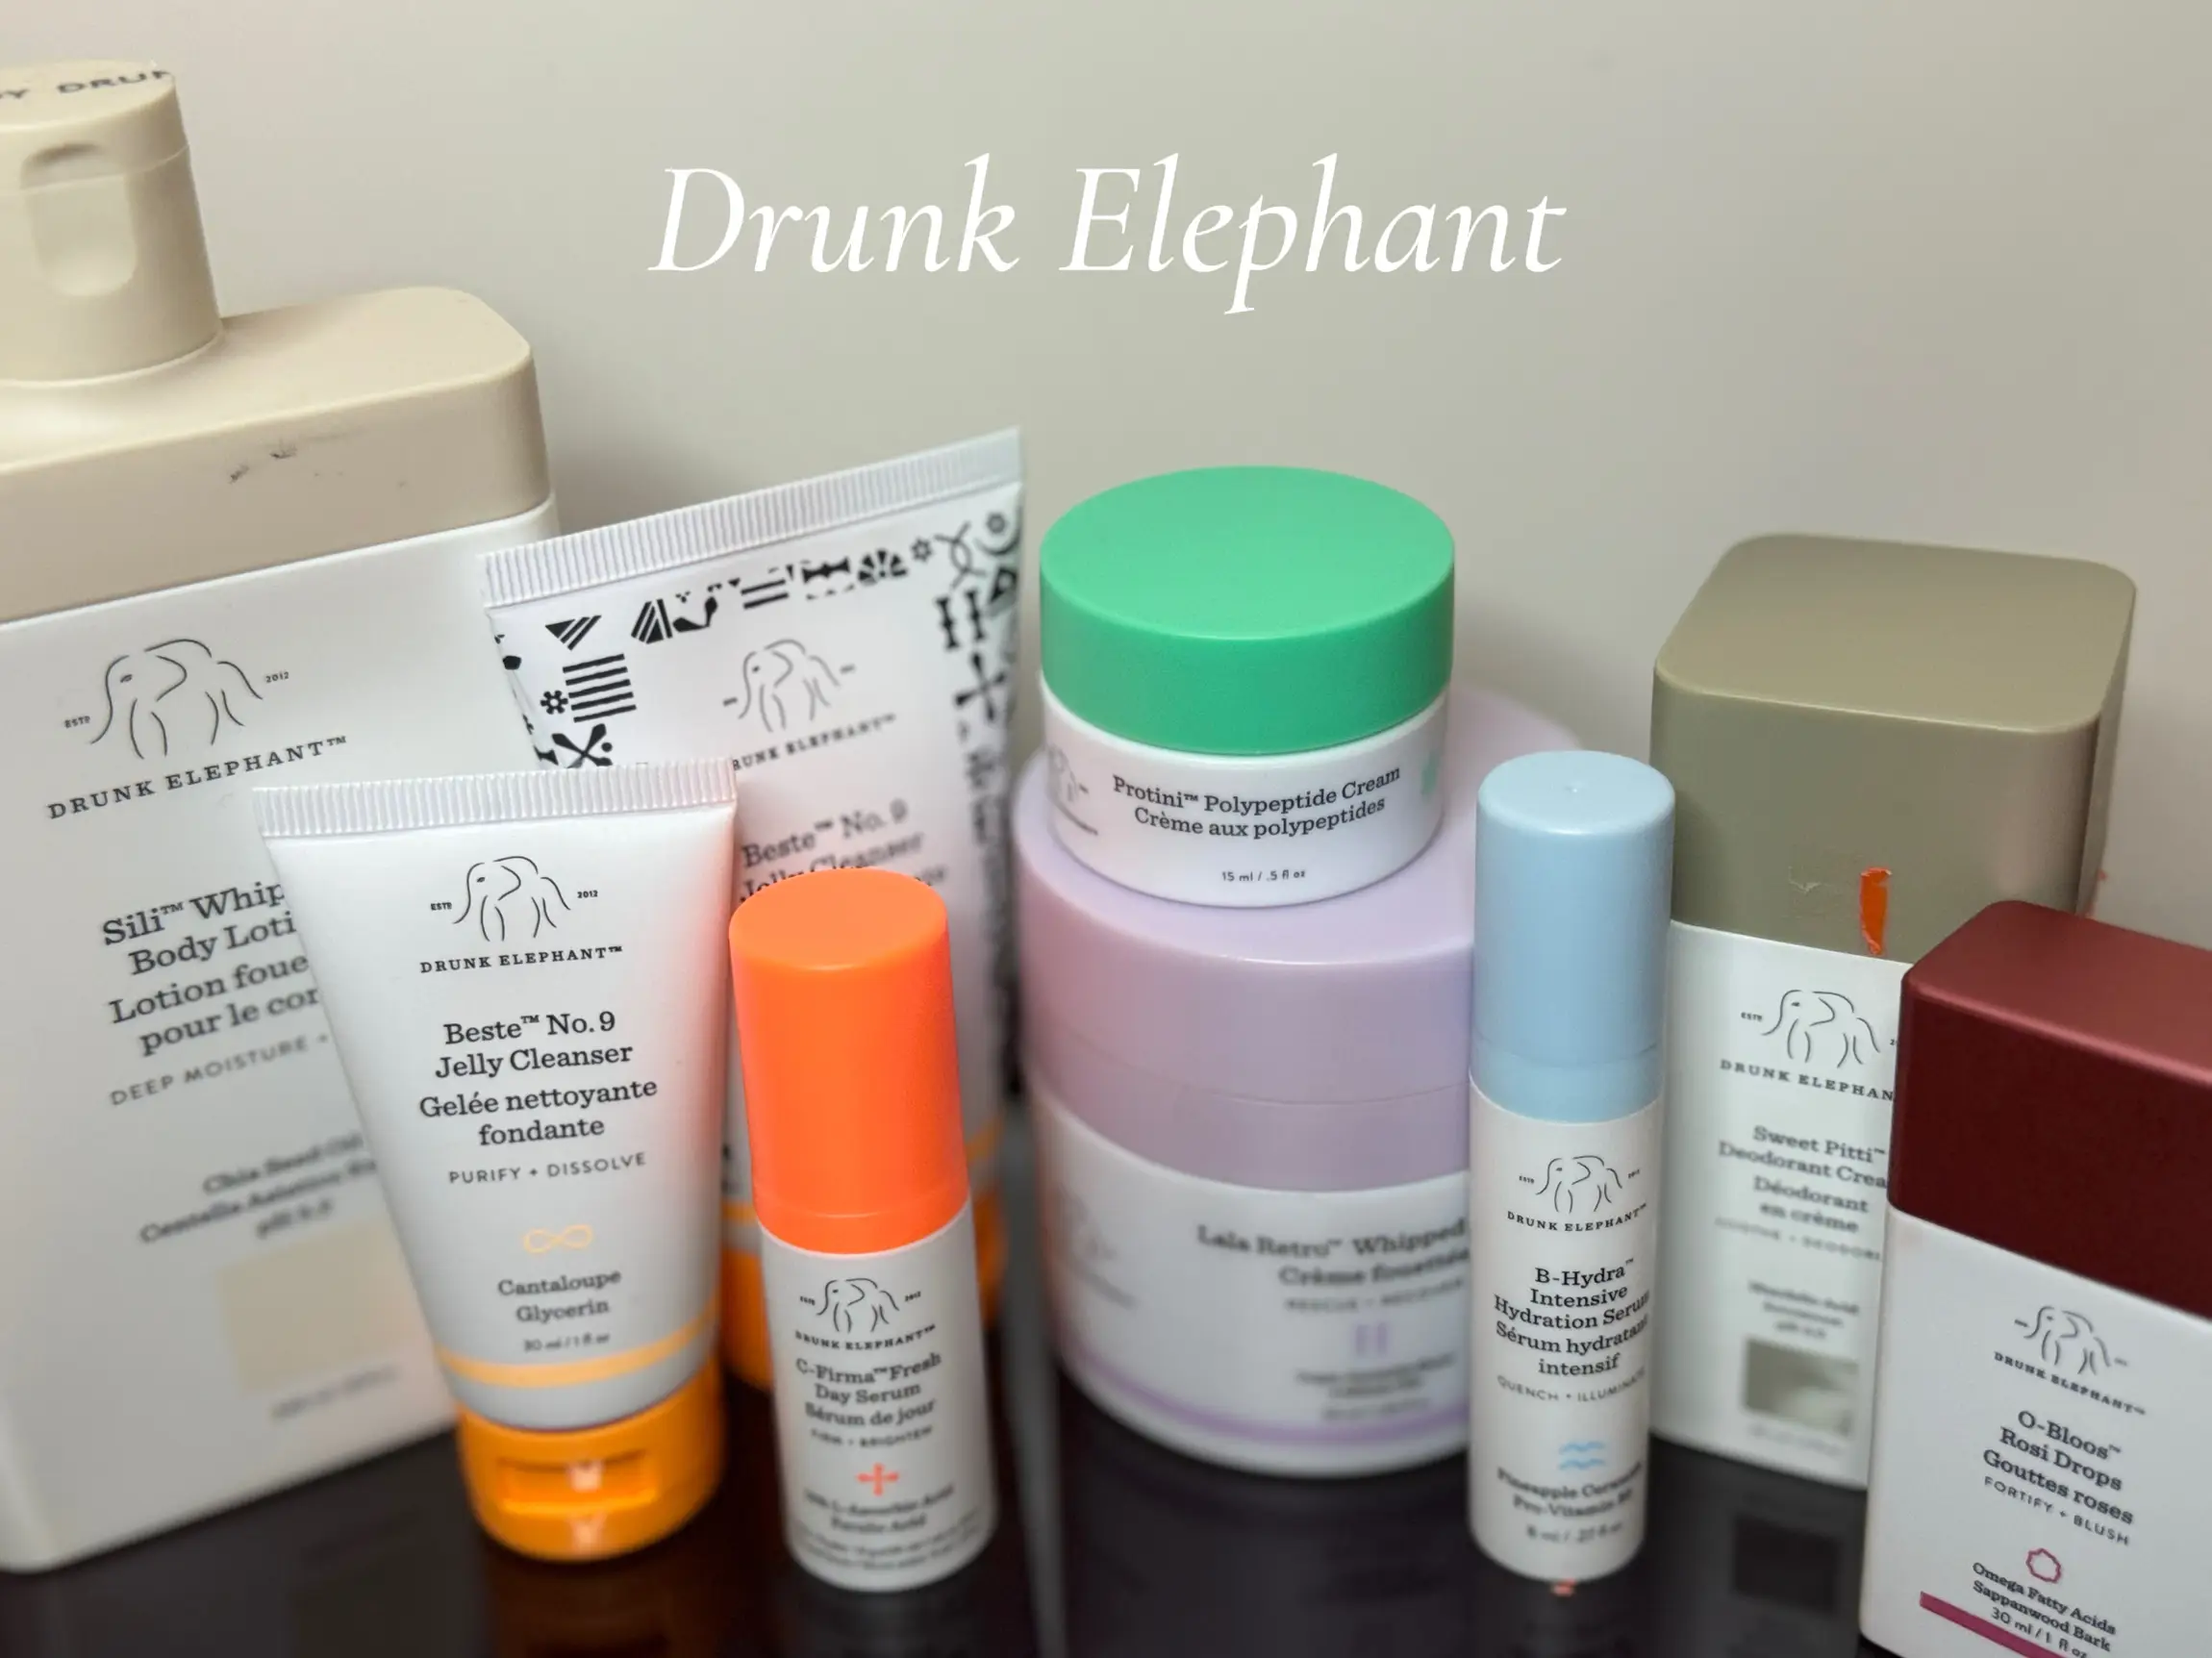 BesteTM No. 9 Jelly Cleanser by DRUNK ELEPHANT, Skin, Cleanser